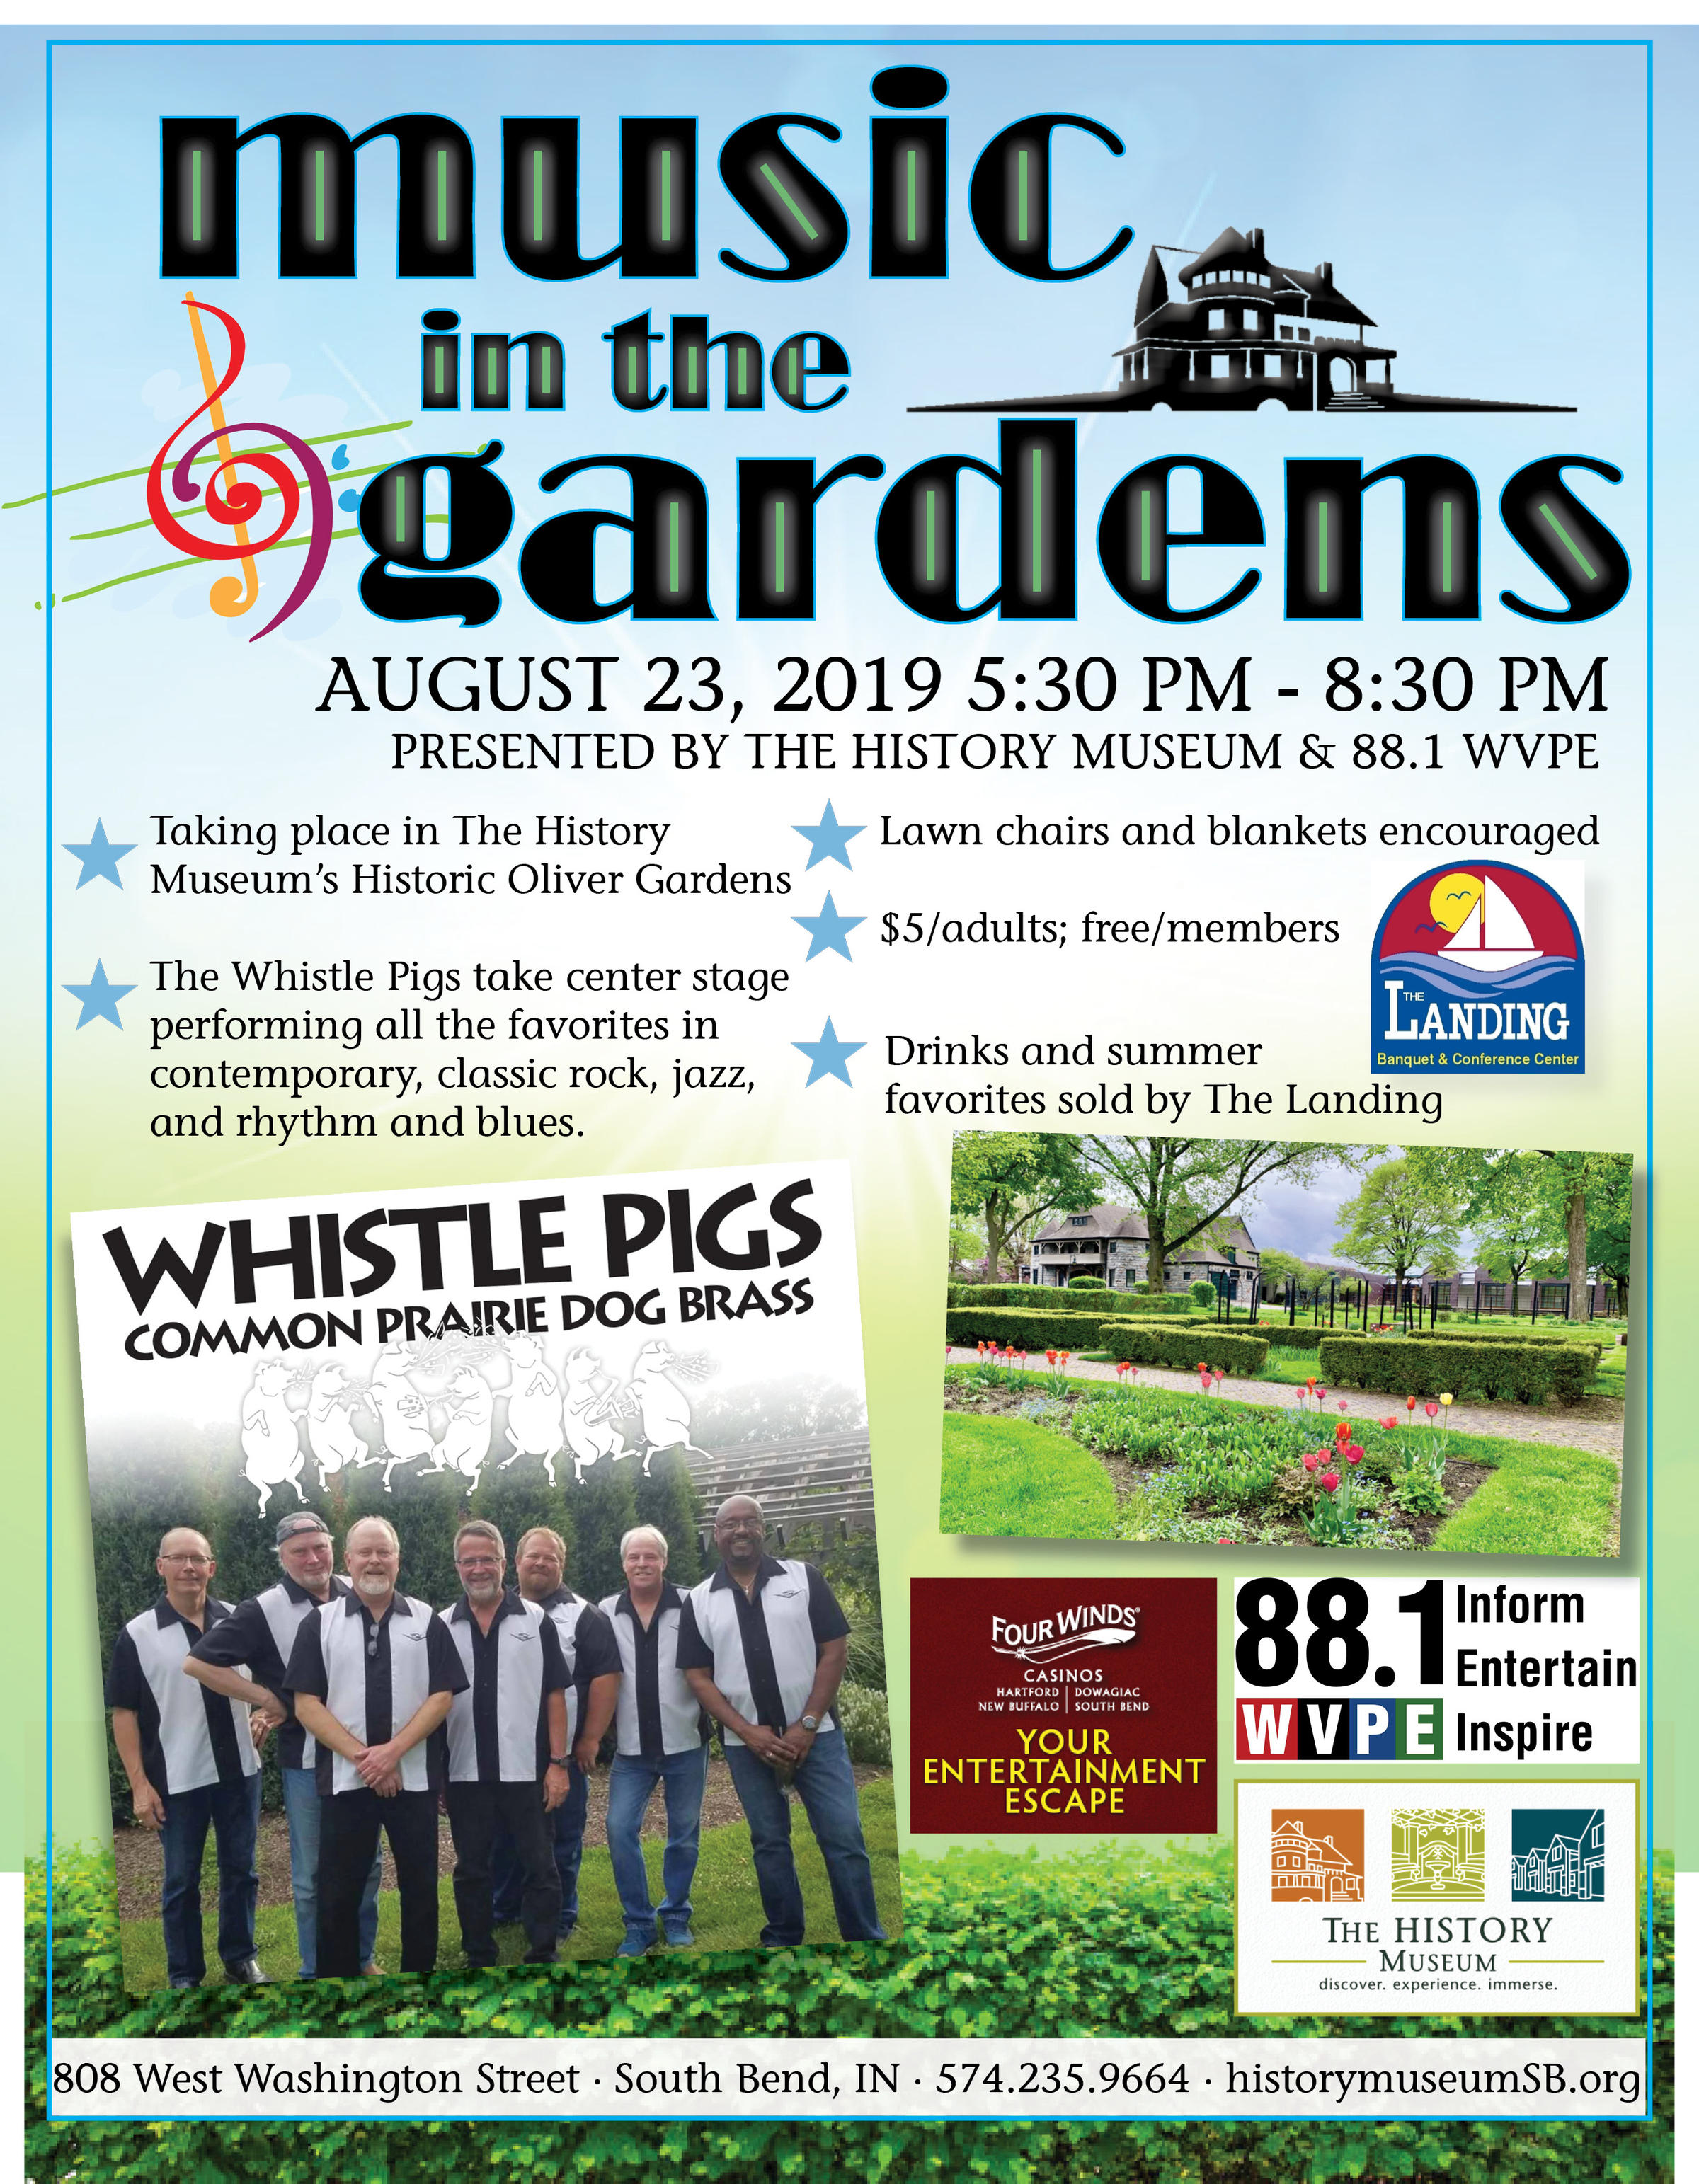 Join WVPE For Music In Gardens - The Final Summer Event In The Winds Entertainment Series |